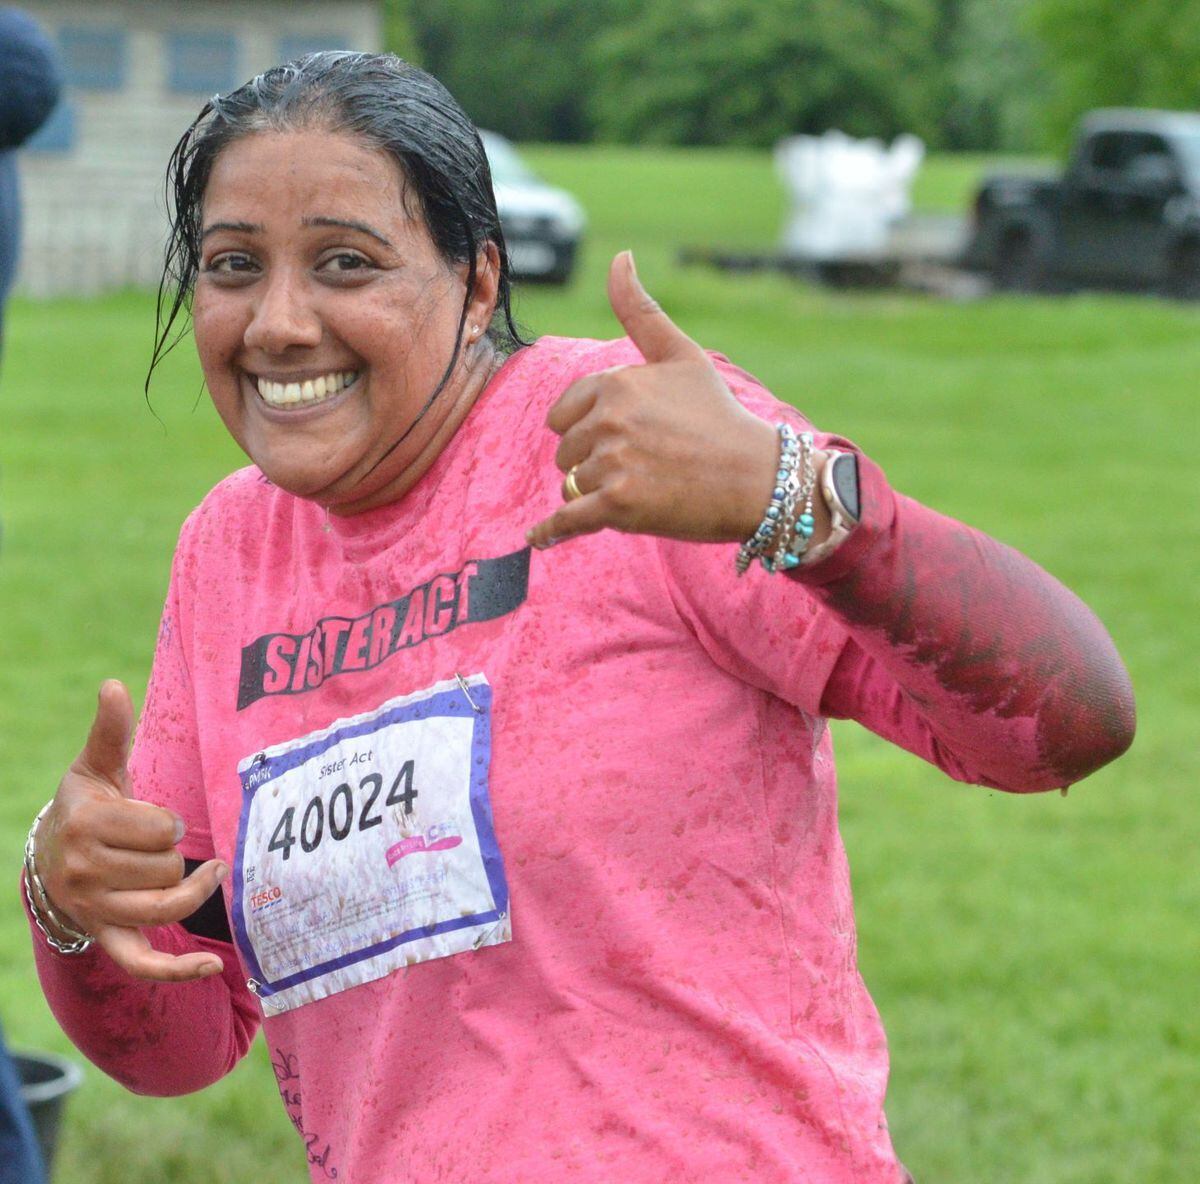 Kully at Pretty Muddy last year, raising money for Cancer Research UK